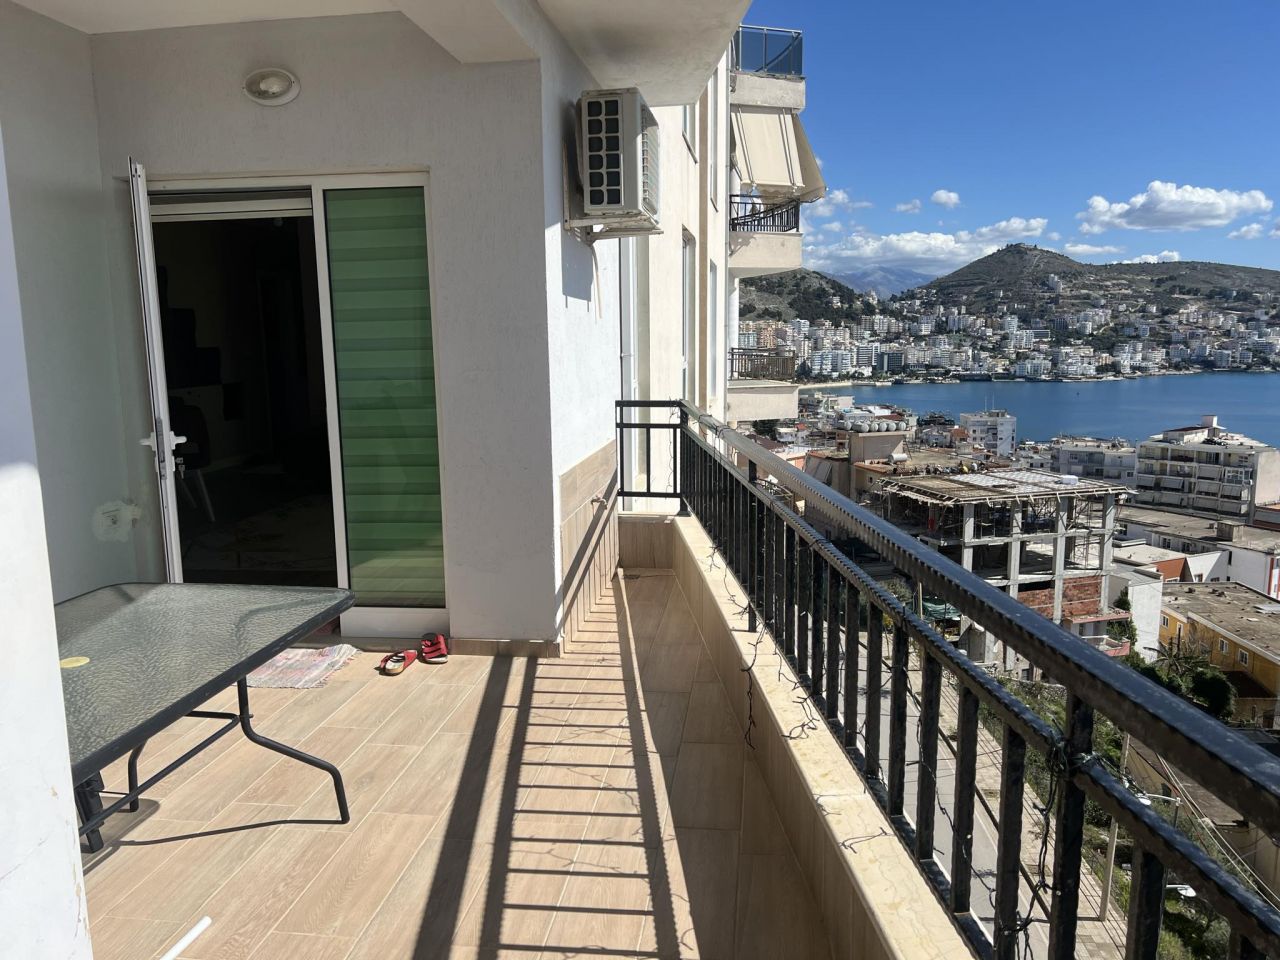 Apartment For Sale In Saranda Albania, Fully Furnished, With A Wonderful Sea View